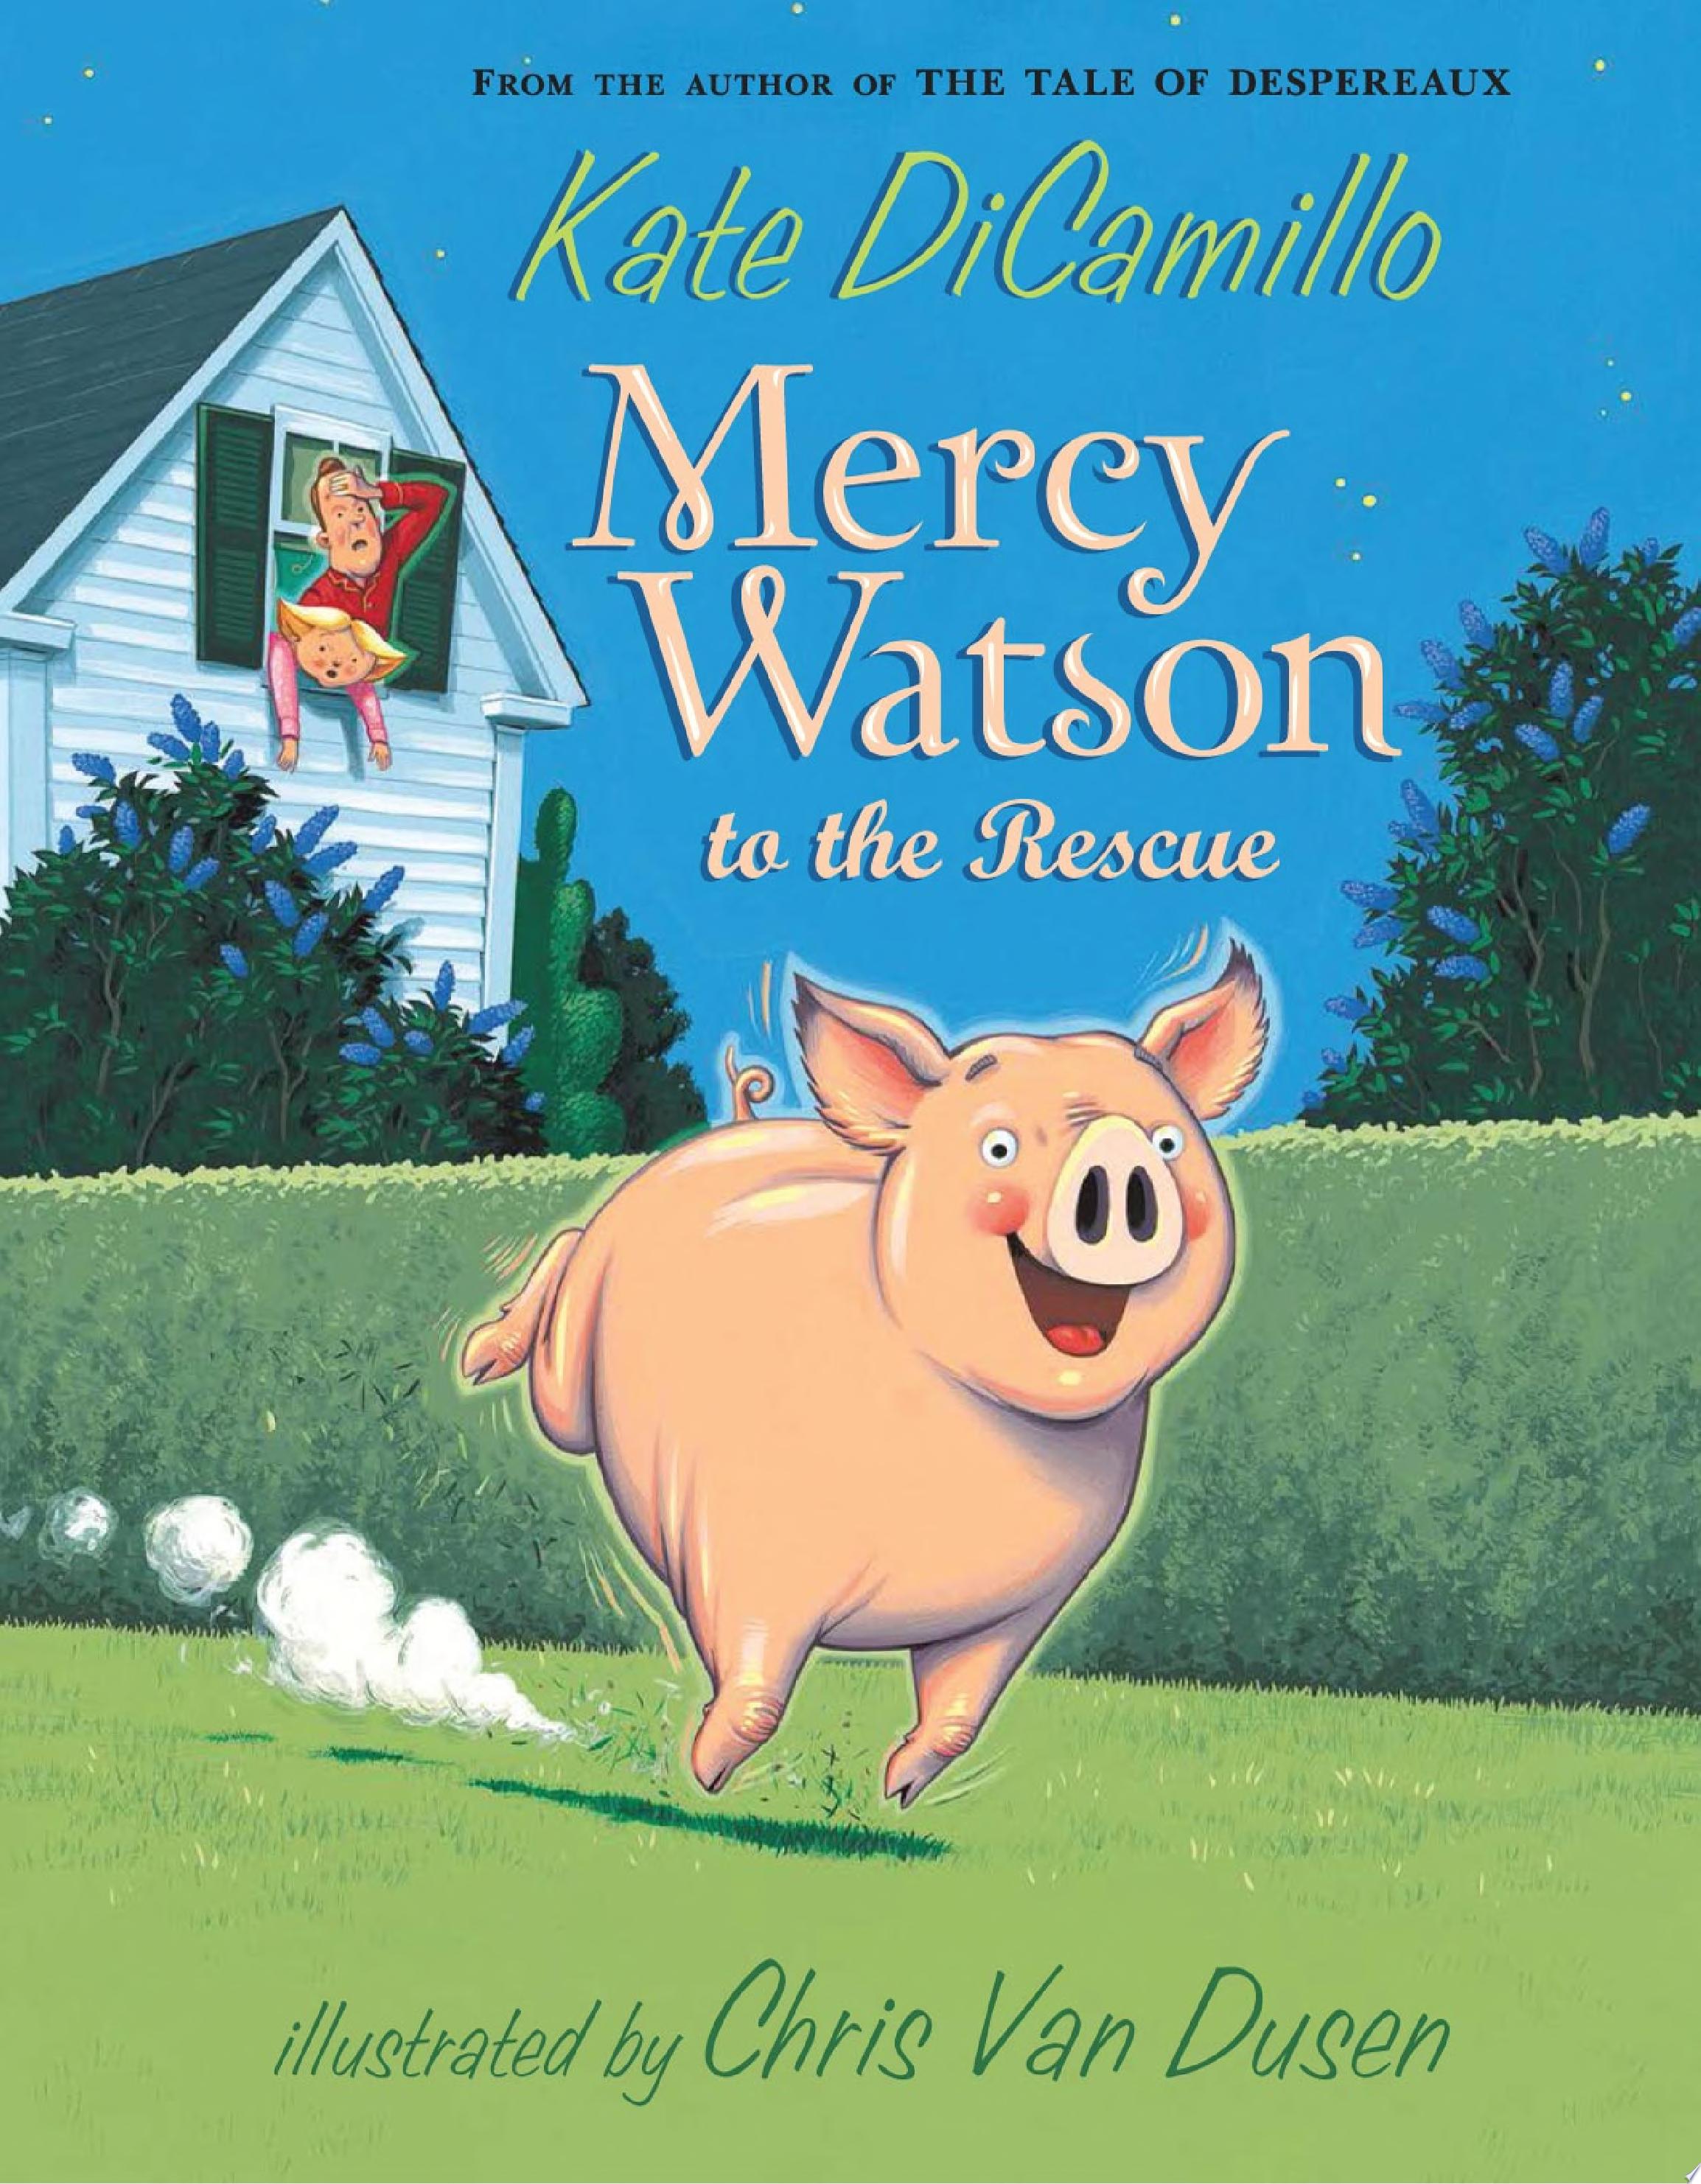 Image for "Mercy Watson to the Rescue"